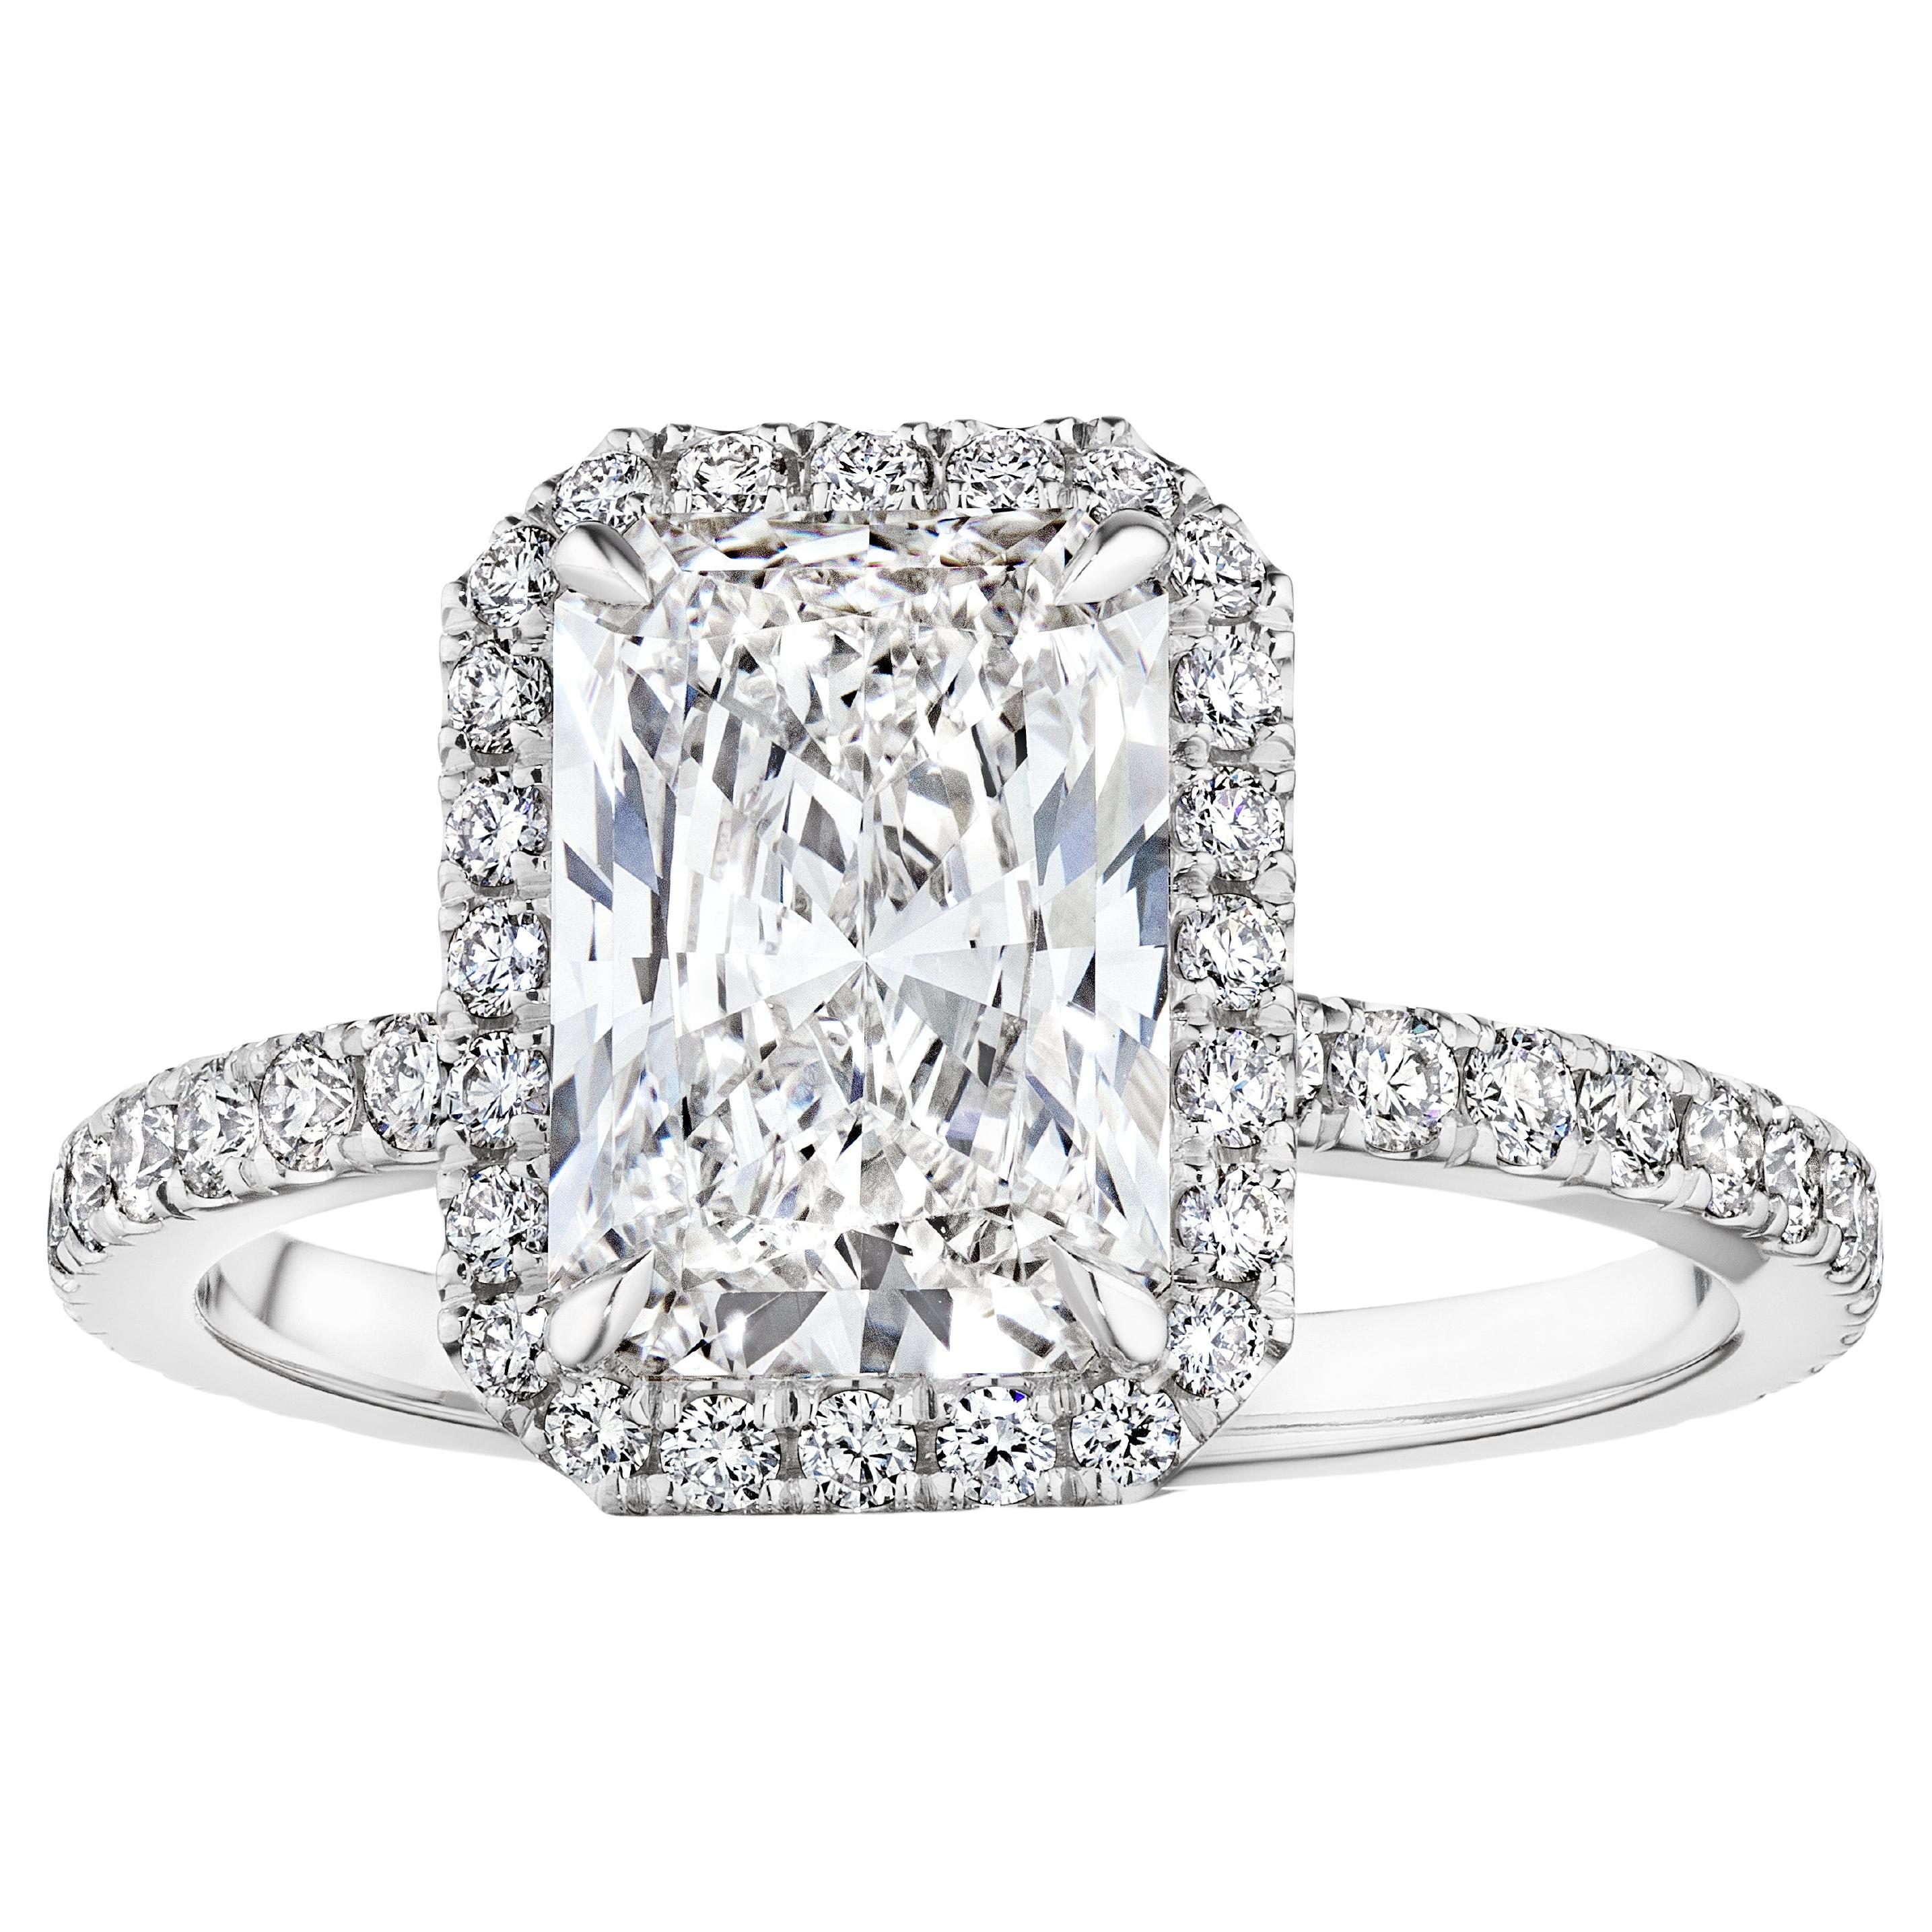 GIA Certified 3 Carat D VS2 Radiant Diamond Engagement Ring "Victoria" For Sale